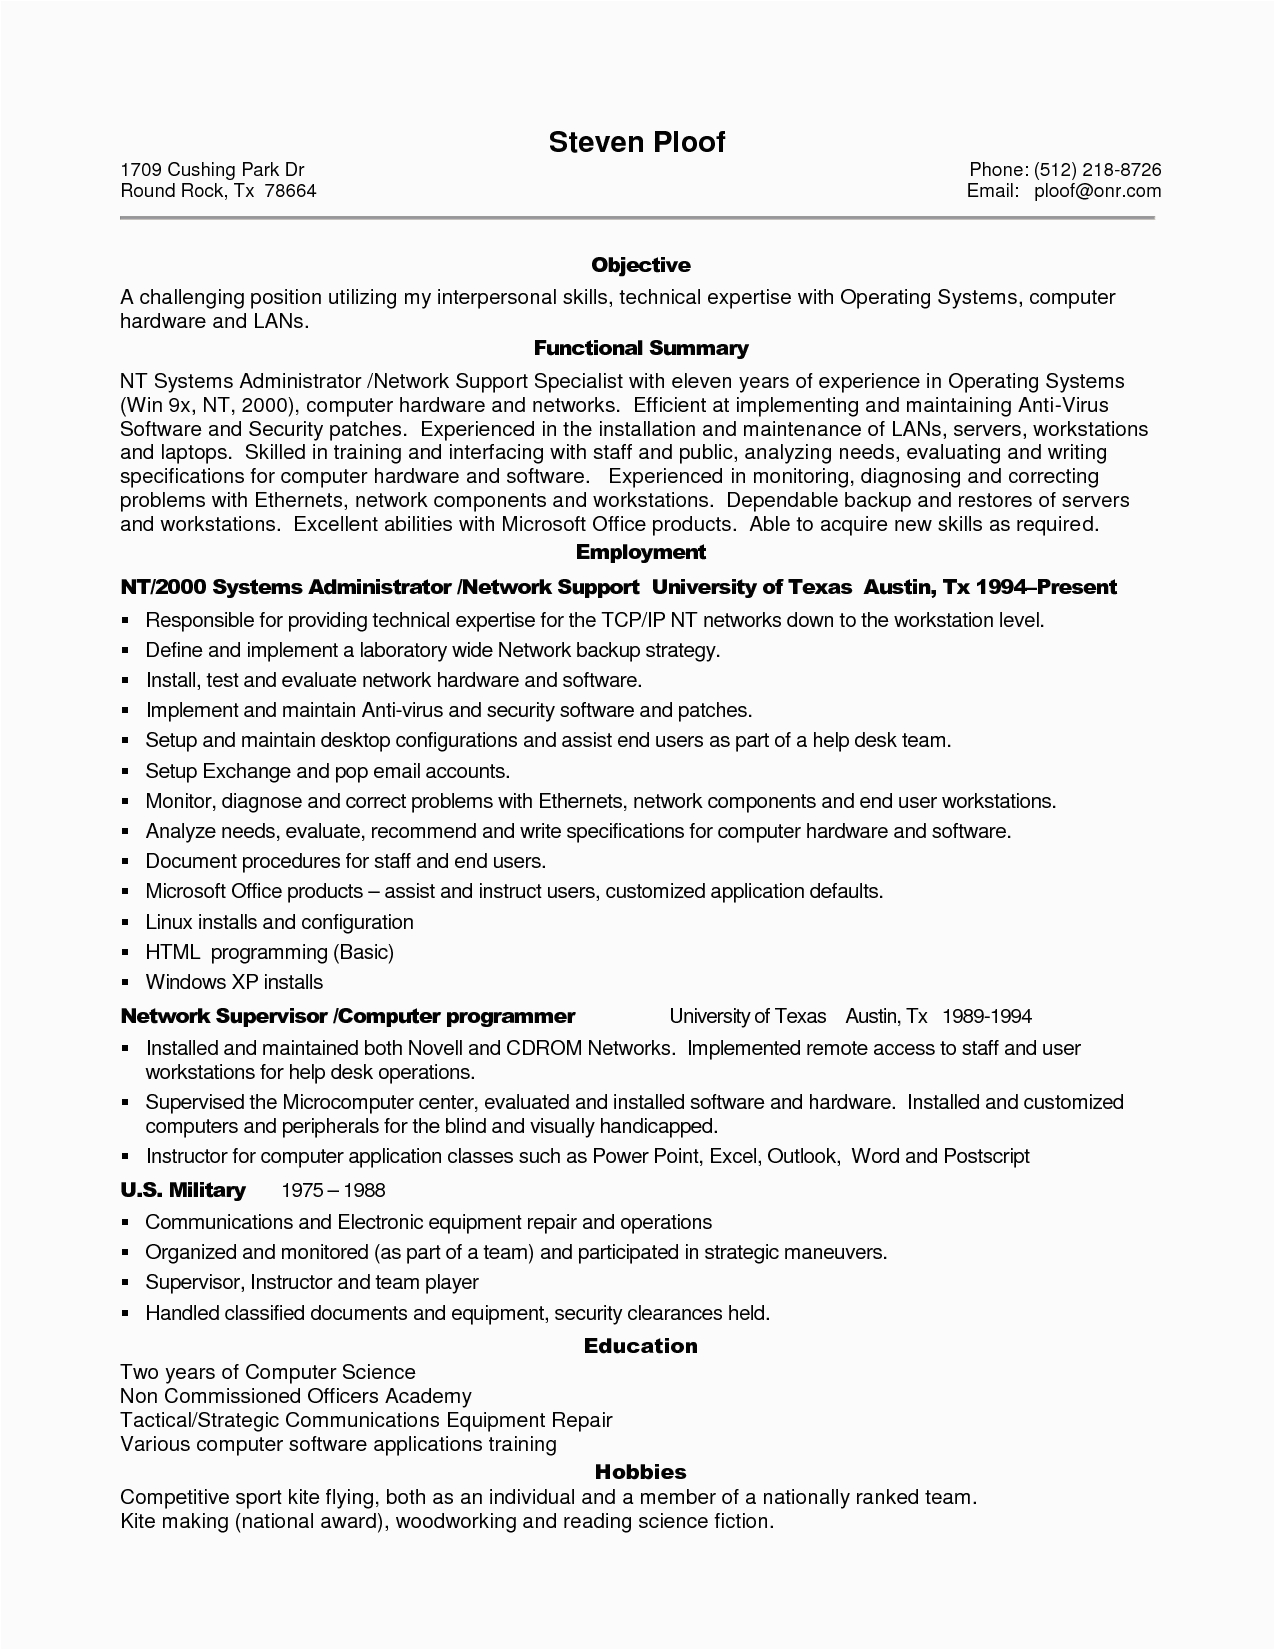 Sample Resume format for Experienced Professionals Sample Resume for Experienced It Professional